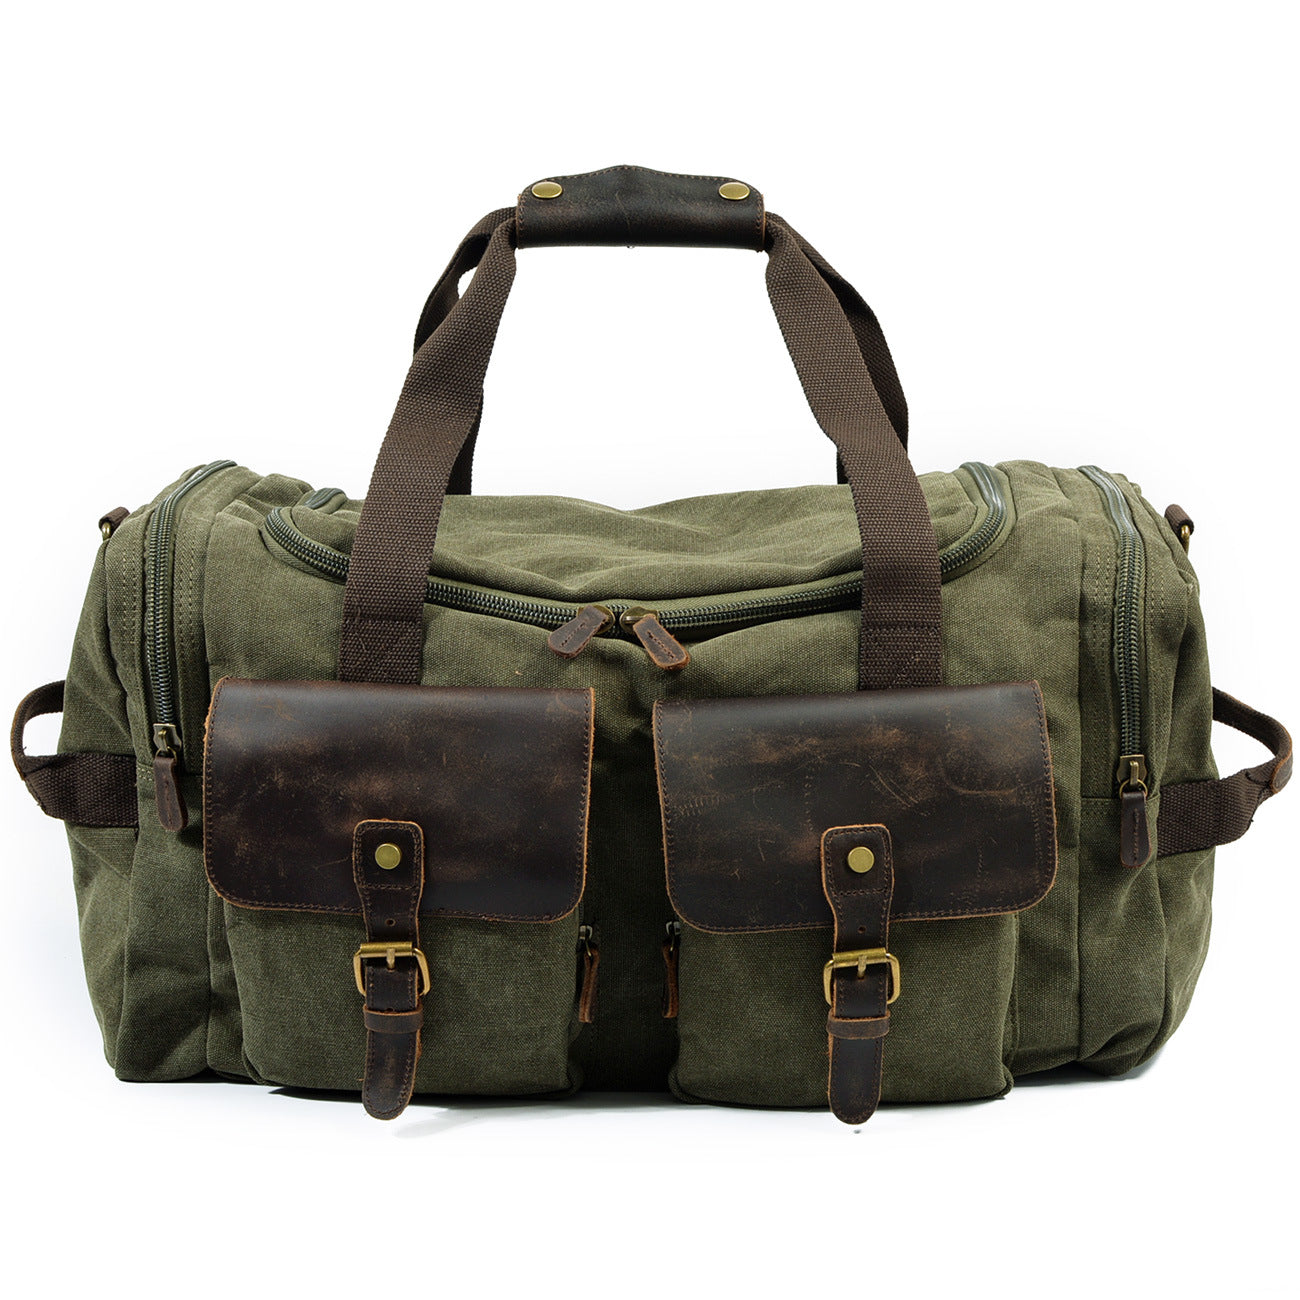 Casual Men's Large Storage Leather Canvas Traveling Duffle Bags 9133-Leather Canvas Duffle Bag-Army Green-Free Shipping Leatheretro